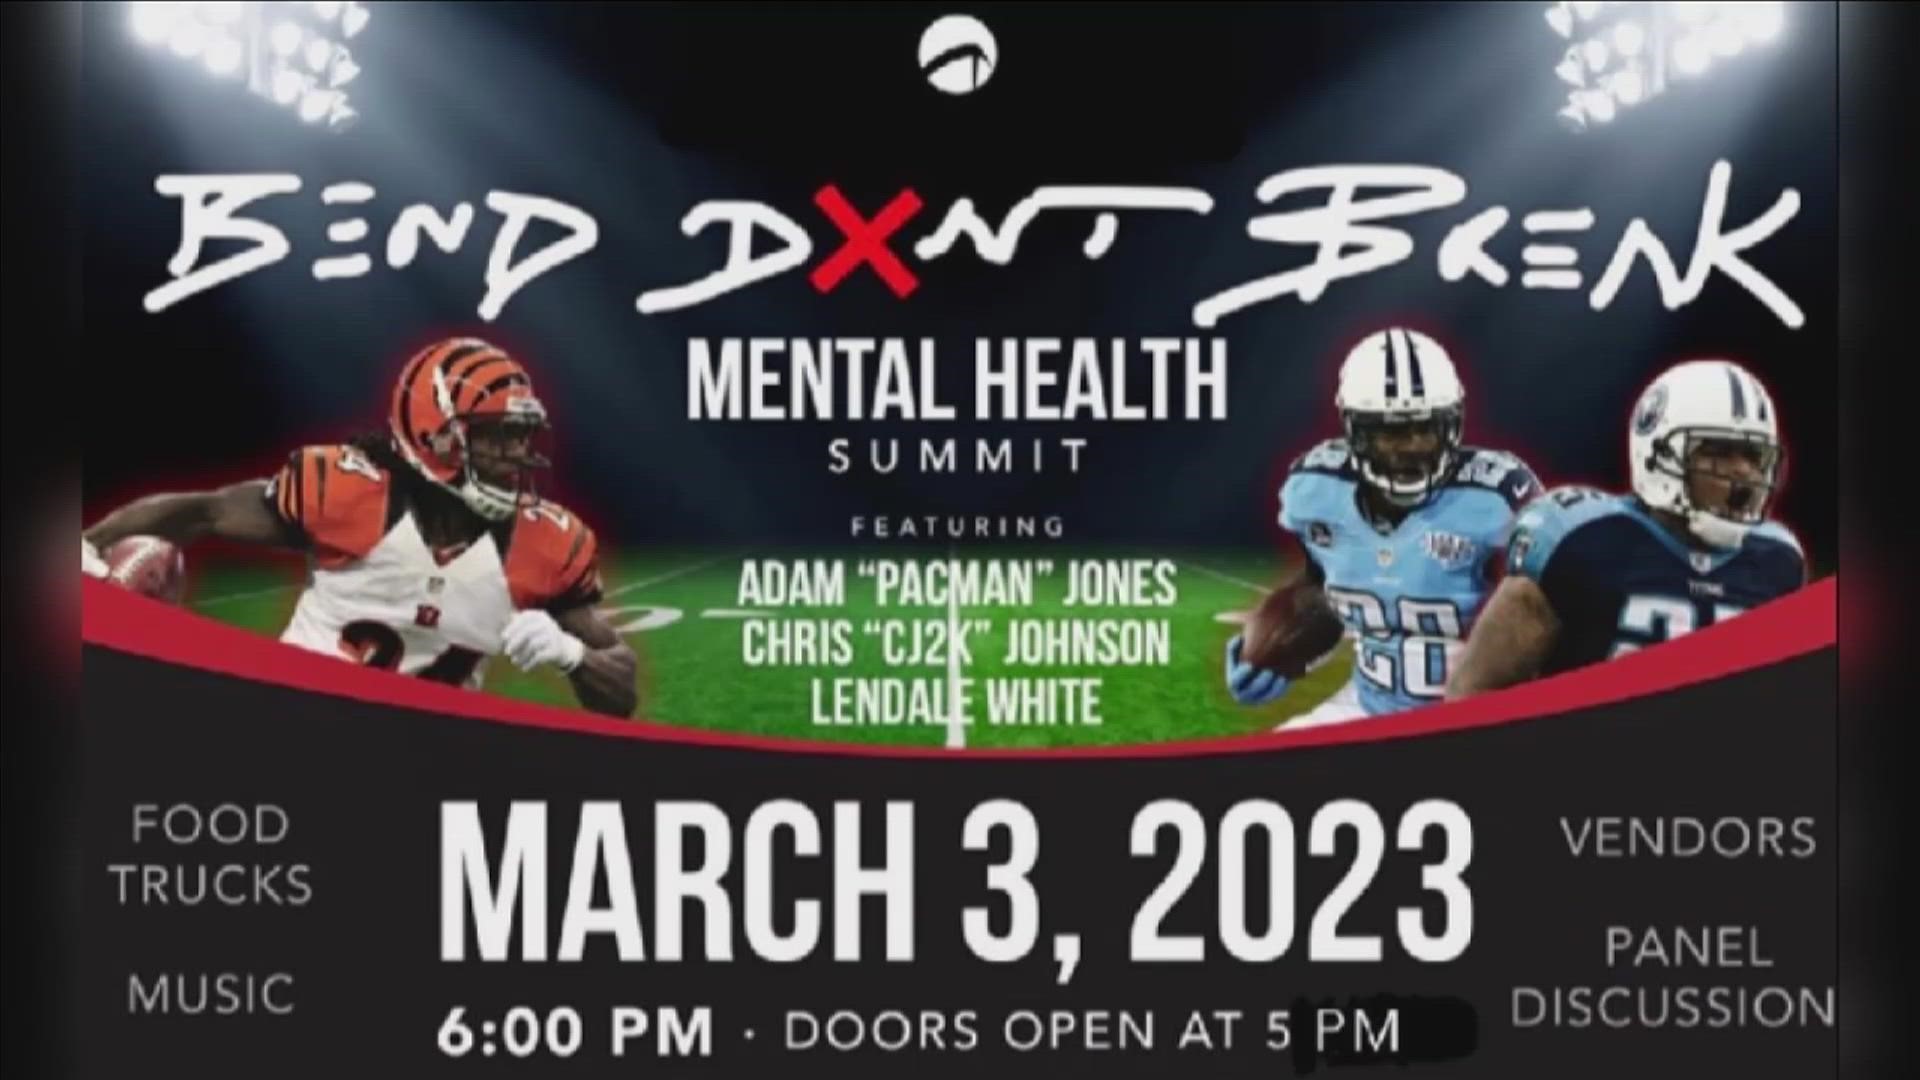 Adam "Pacman" Jones, Lendale White and Chris "CJ2K" Johnson all dealt with pressure at a young age, but now are participating in an important summit.